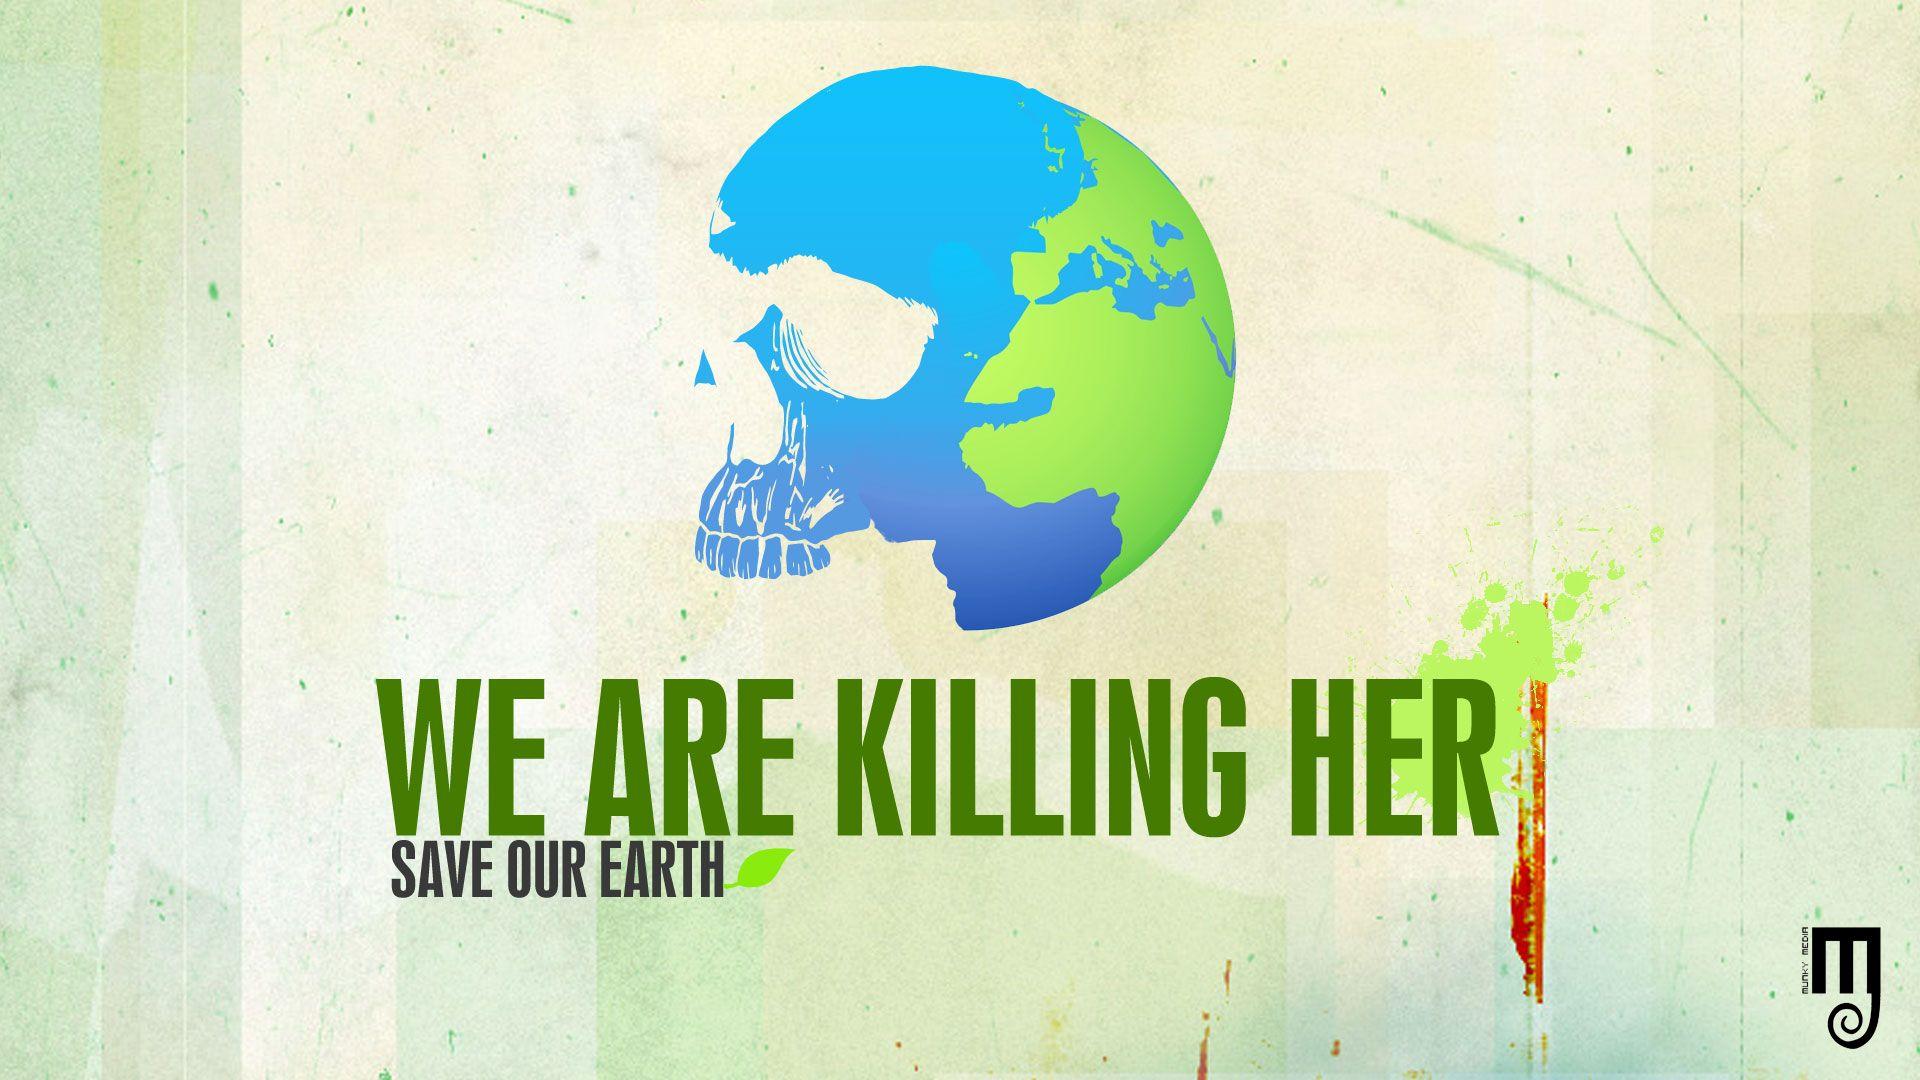 Save our Earth